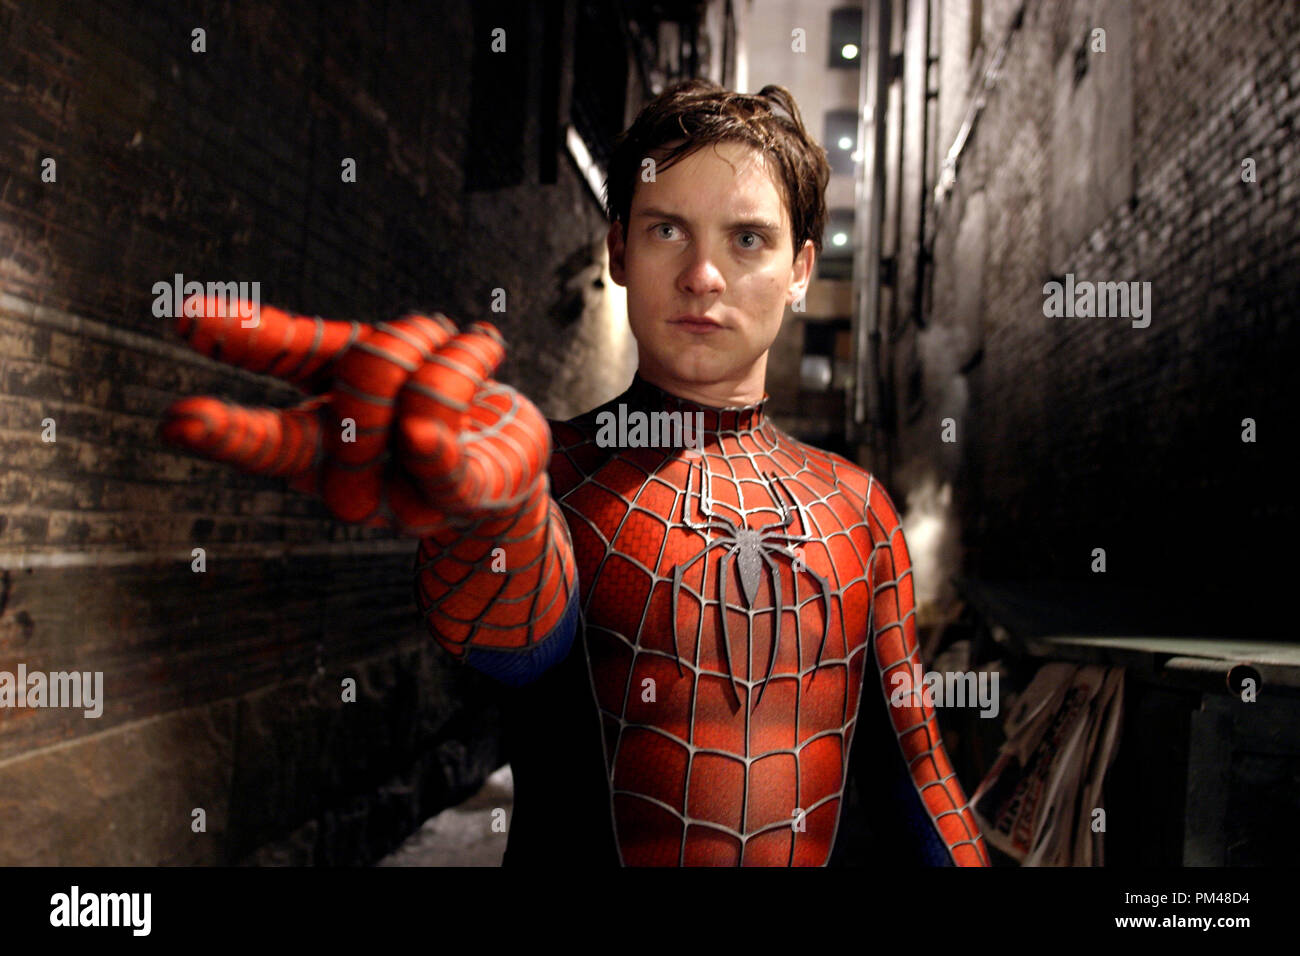 'Spider-Man 2' Tobey Maguire (Peter Parker/Spider-Man) © 2004 Columbia/Sony Pictures Stockfoto